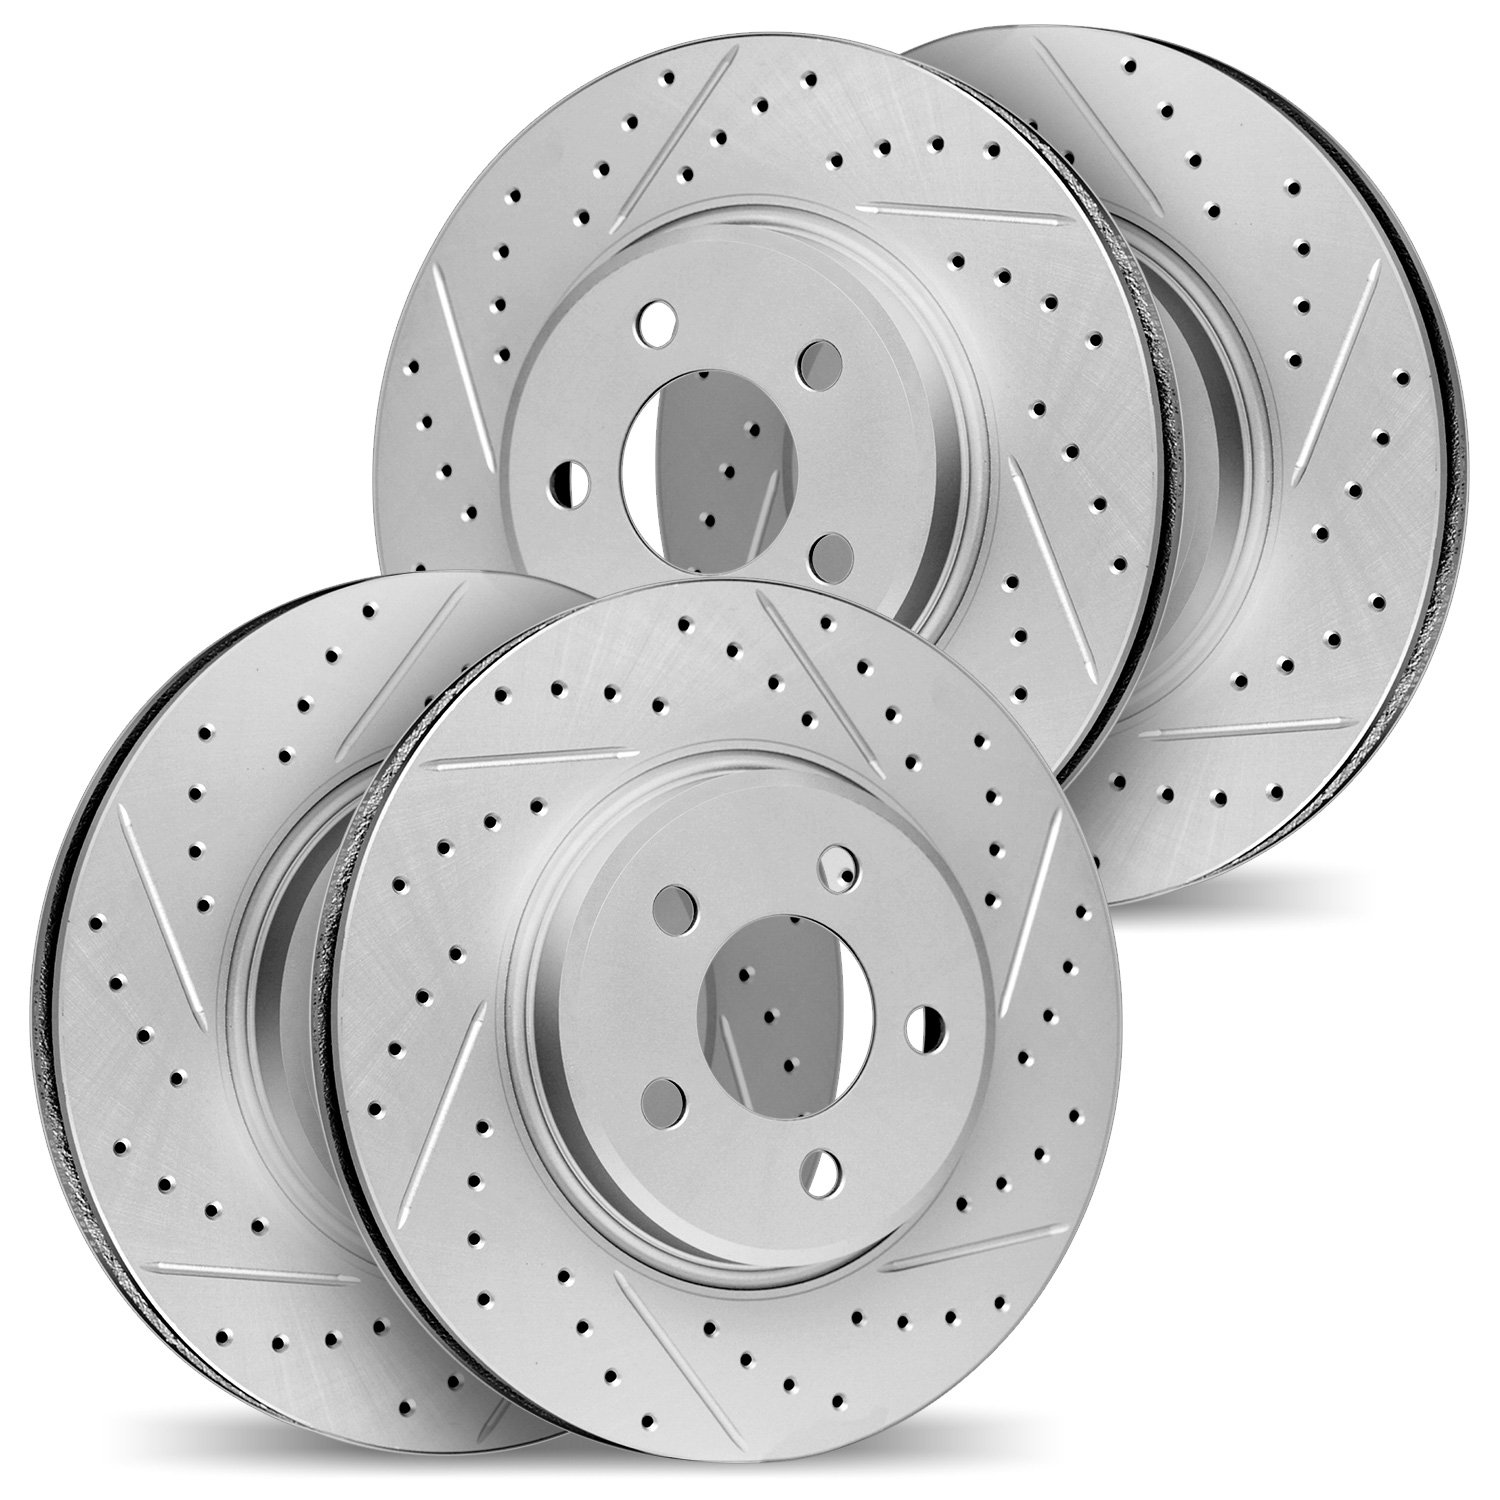 2004-39025 Geoperformance Drilled/Slotted Brake Rotors, 2006-2014 Mopar, Position: Front and Rear